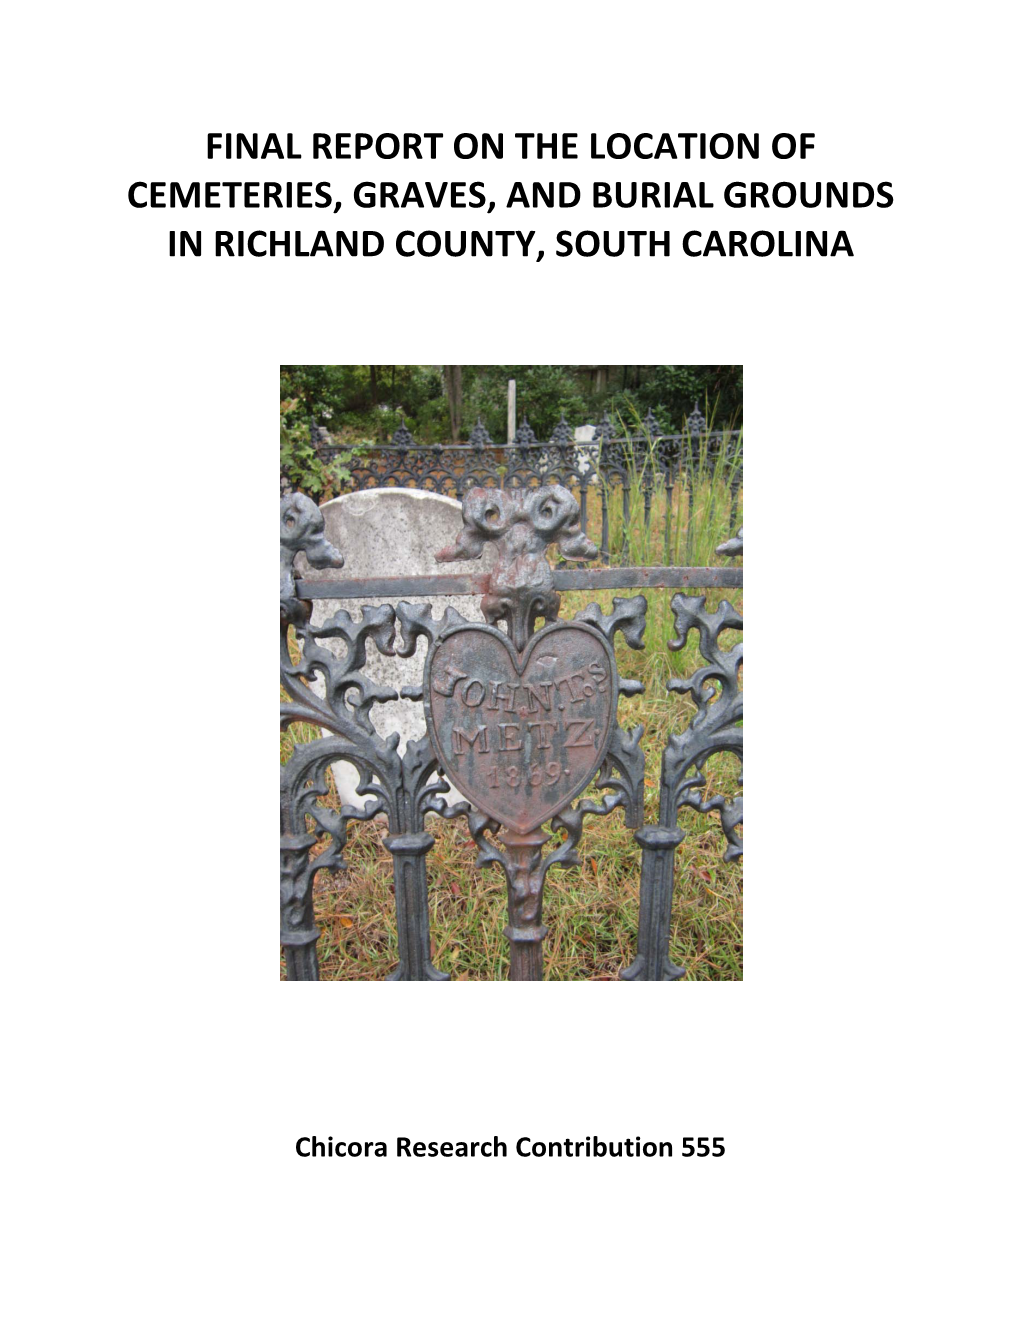 Final Report on the Location of Cemeteries, Graves, and Burial Grounds in Richland County, South Carolina